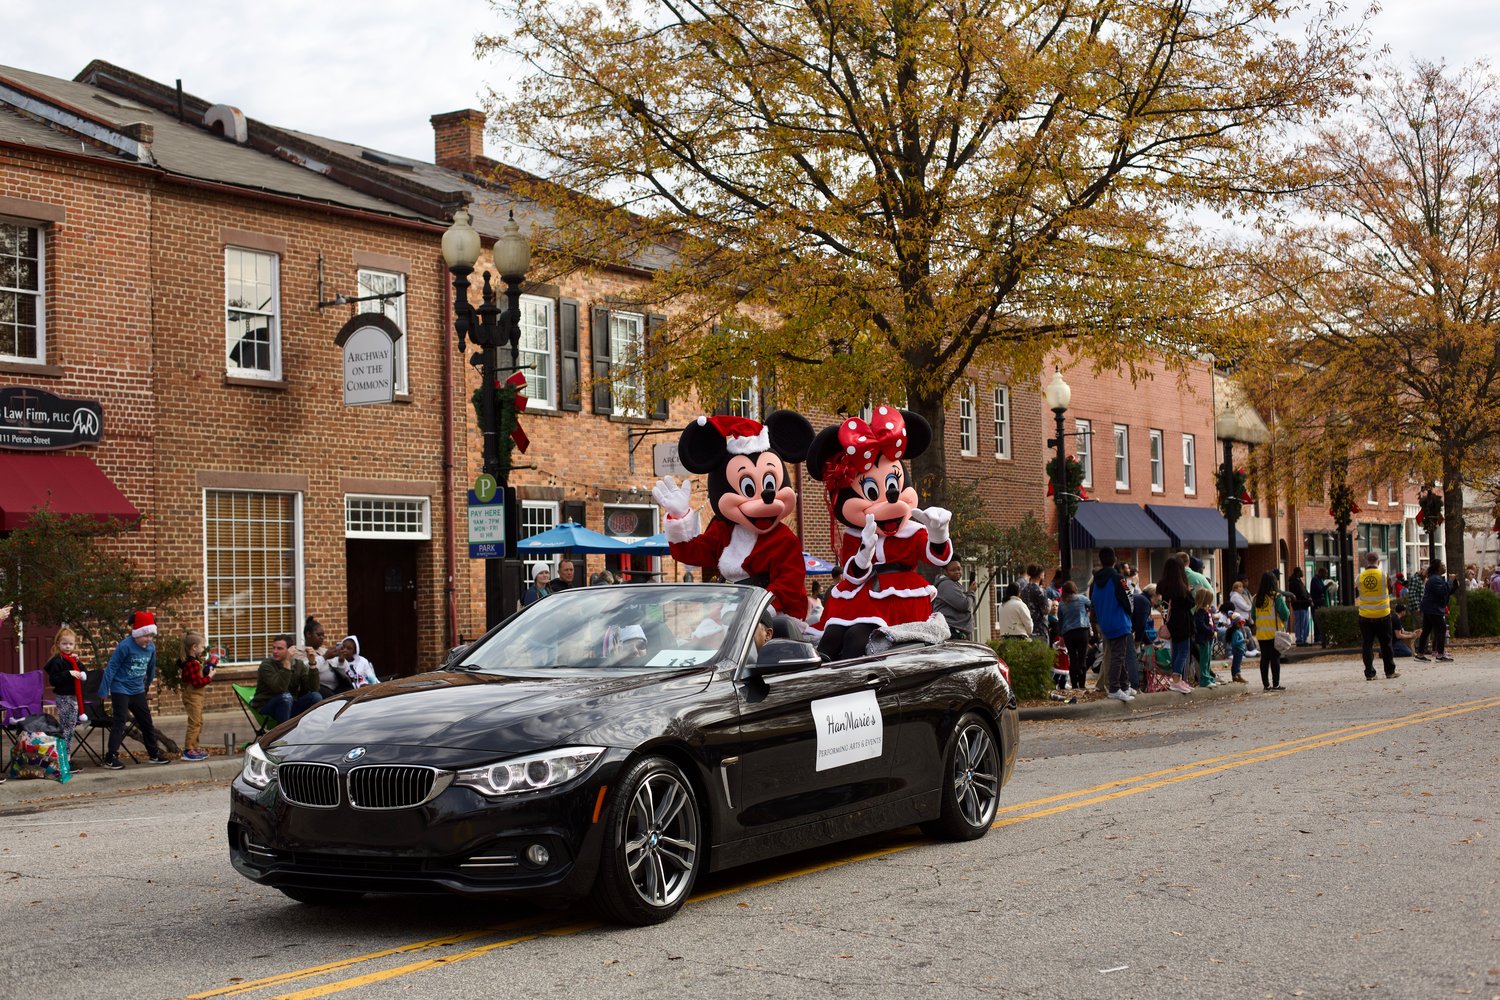 Mickey and Minnie Clause wave to the crowd.